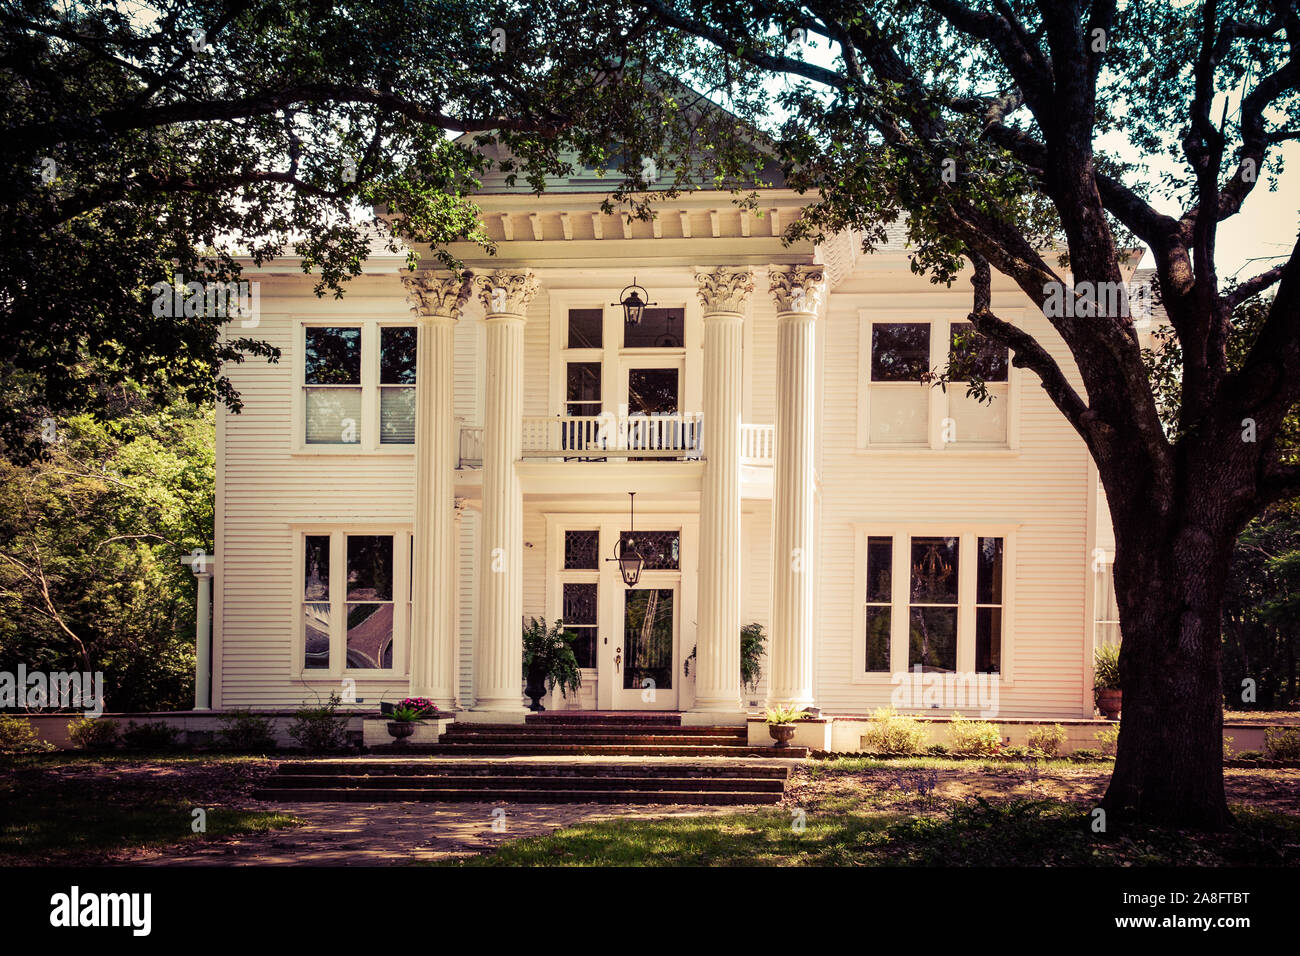 An Antebellum style house in neoclassical design highlighted by Corinthian columns and large oak trees creating a canopy entrance in Hattiesburg, MS, Stock Photo